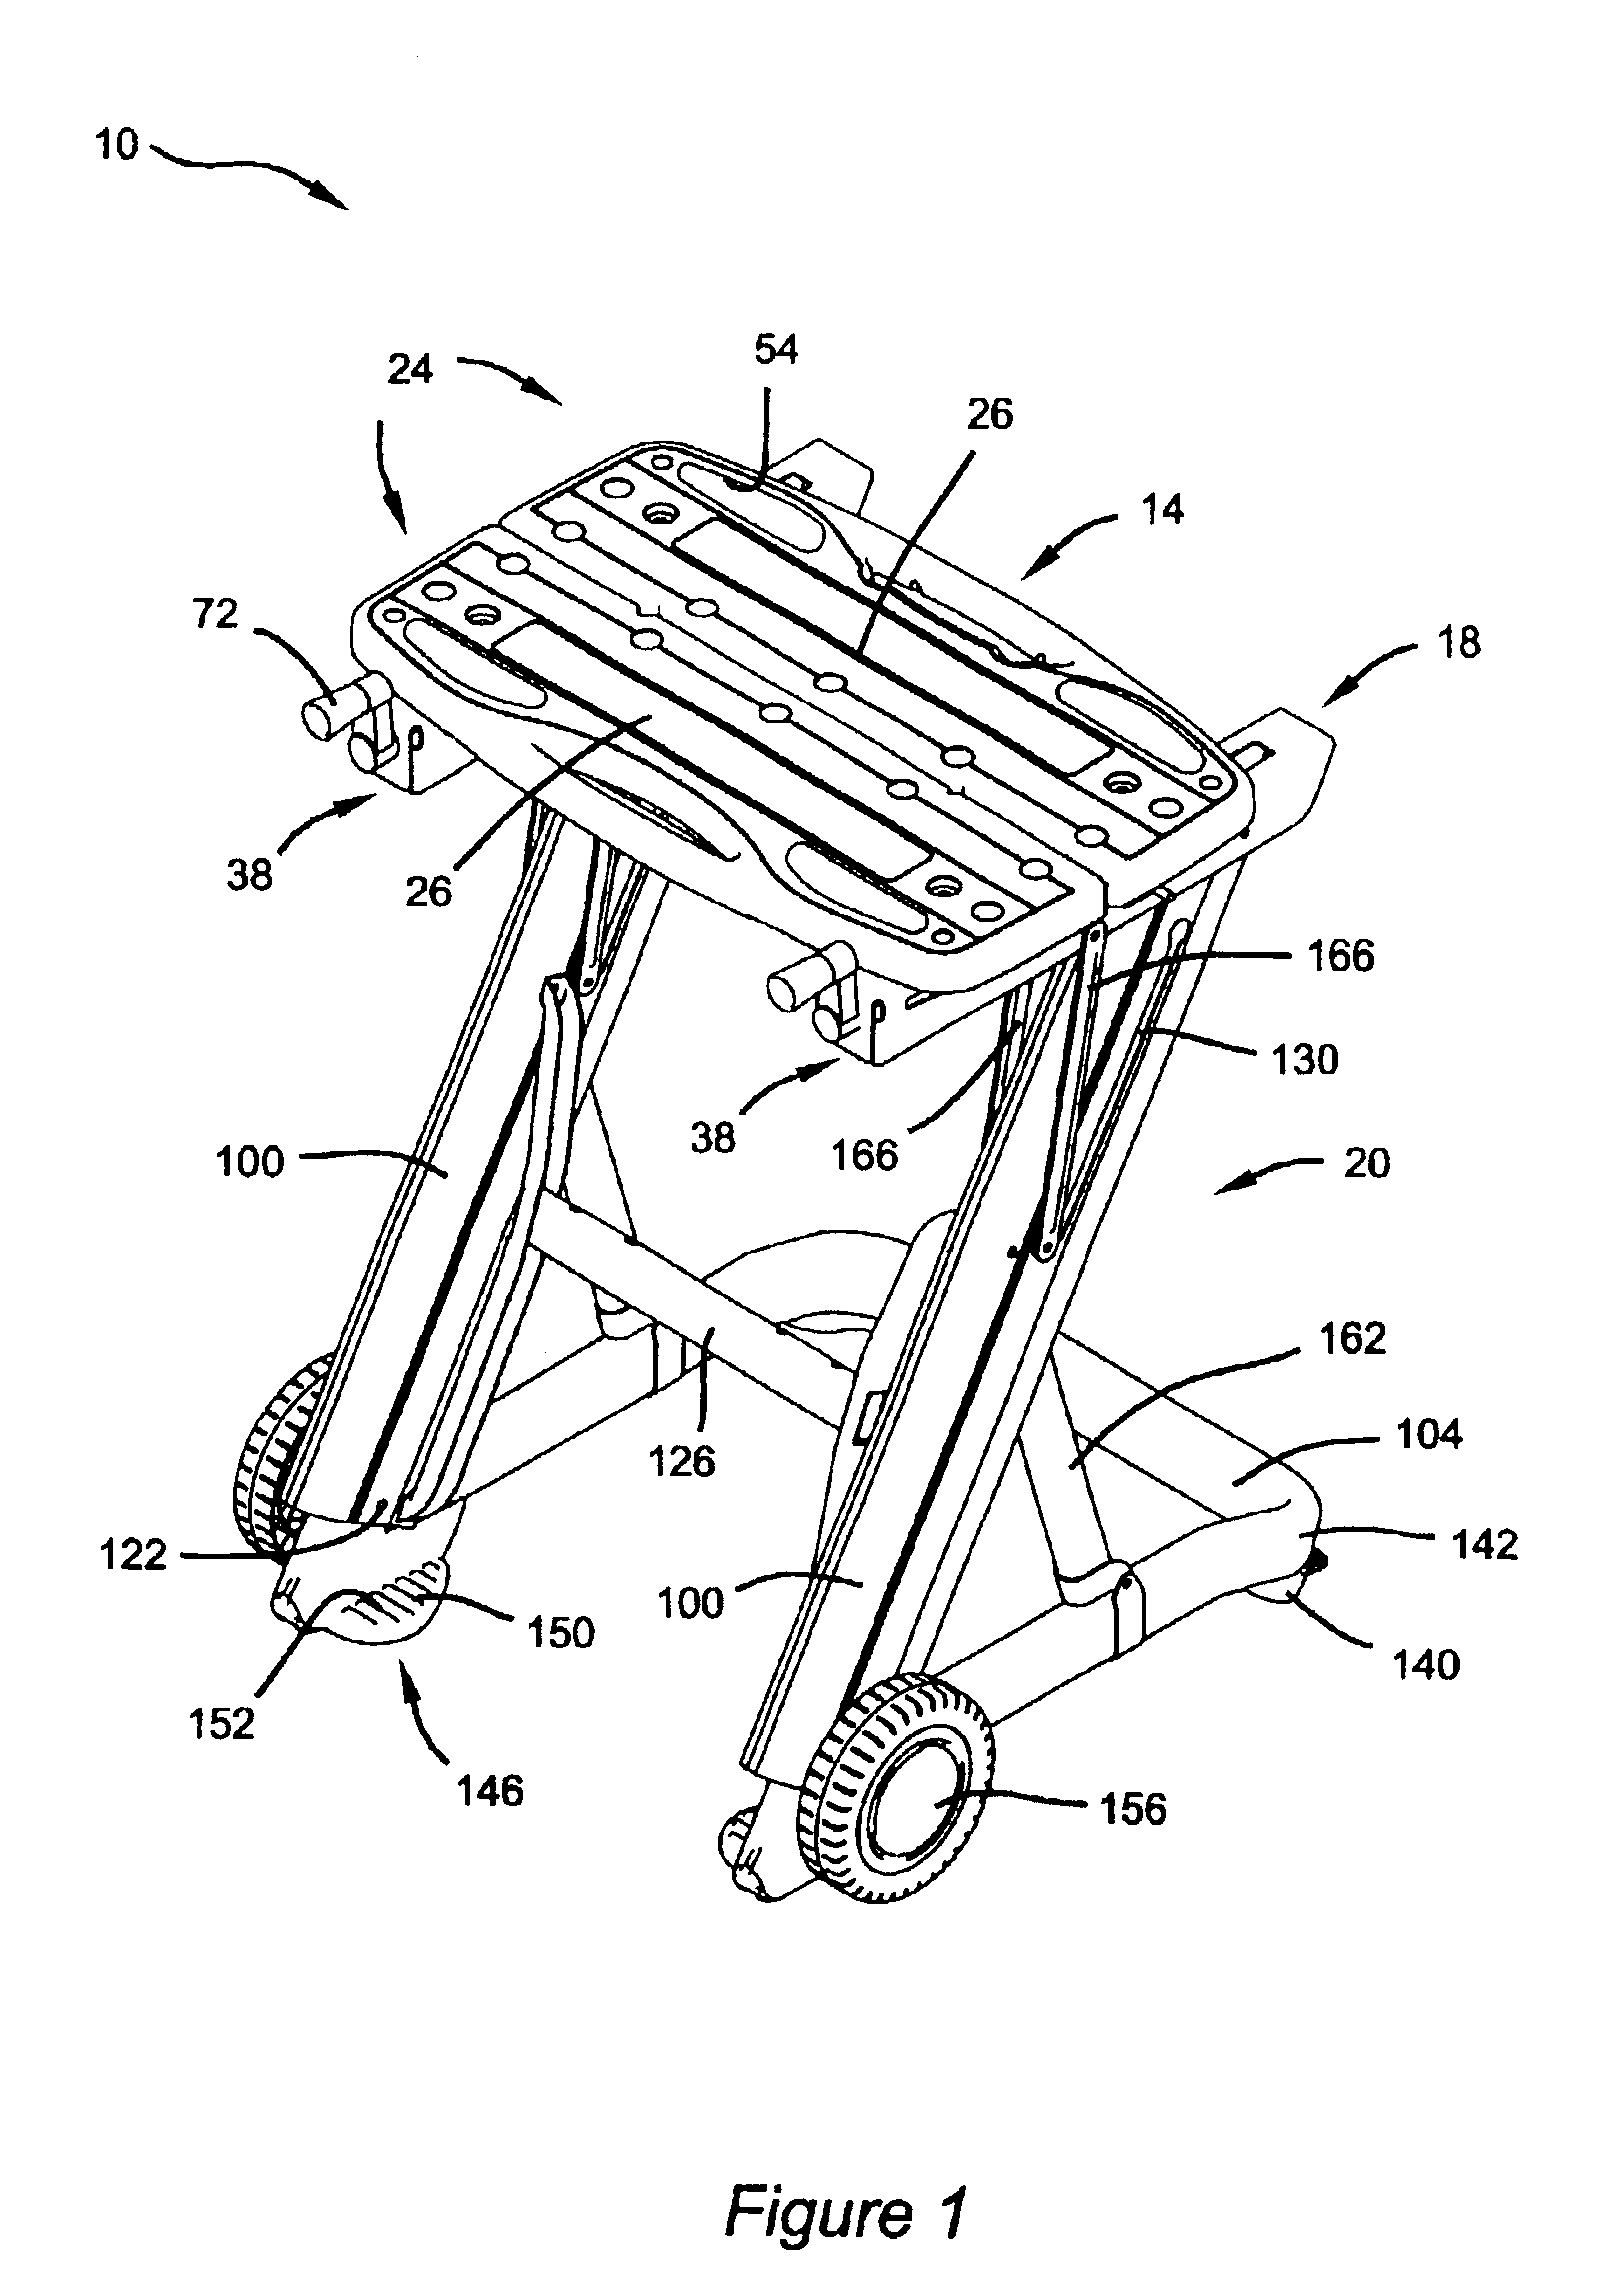 Portable workbench having collapsible support structure